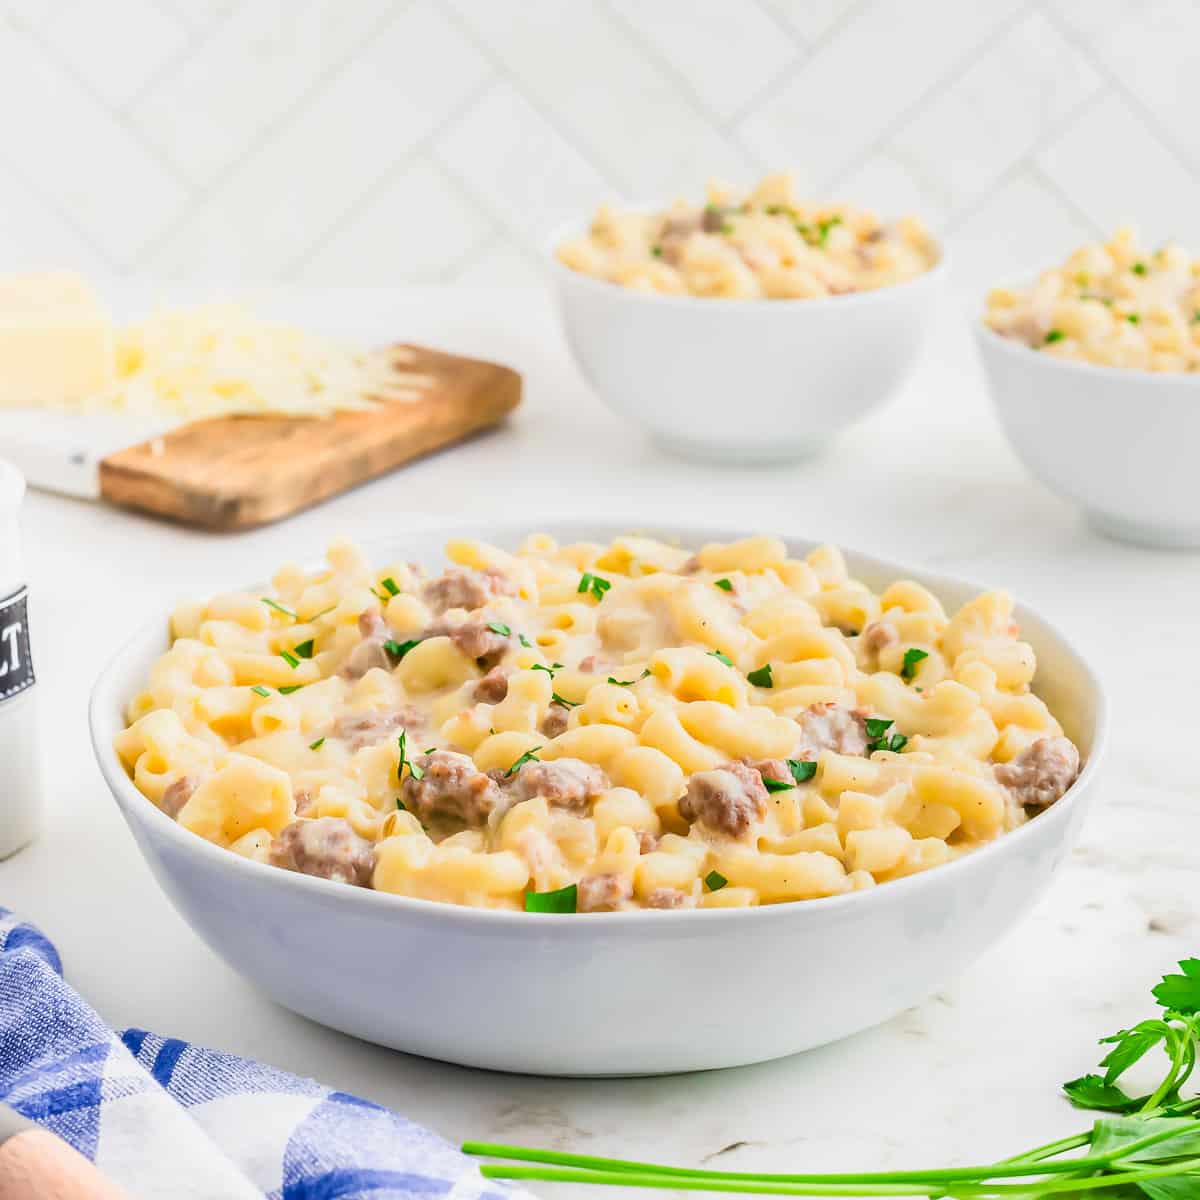 A bowl of macaroni and cheese with sausage and parsley.